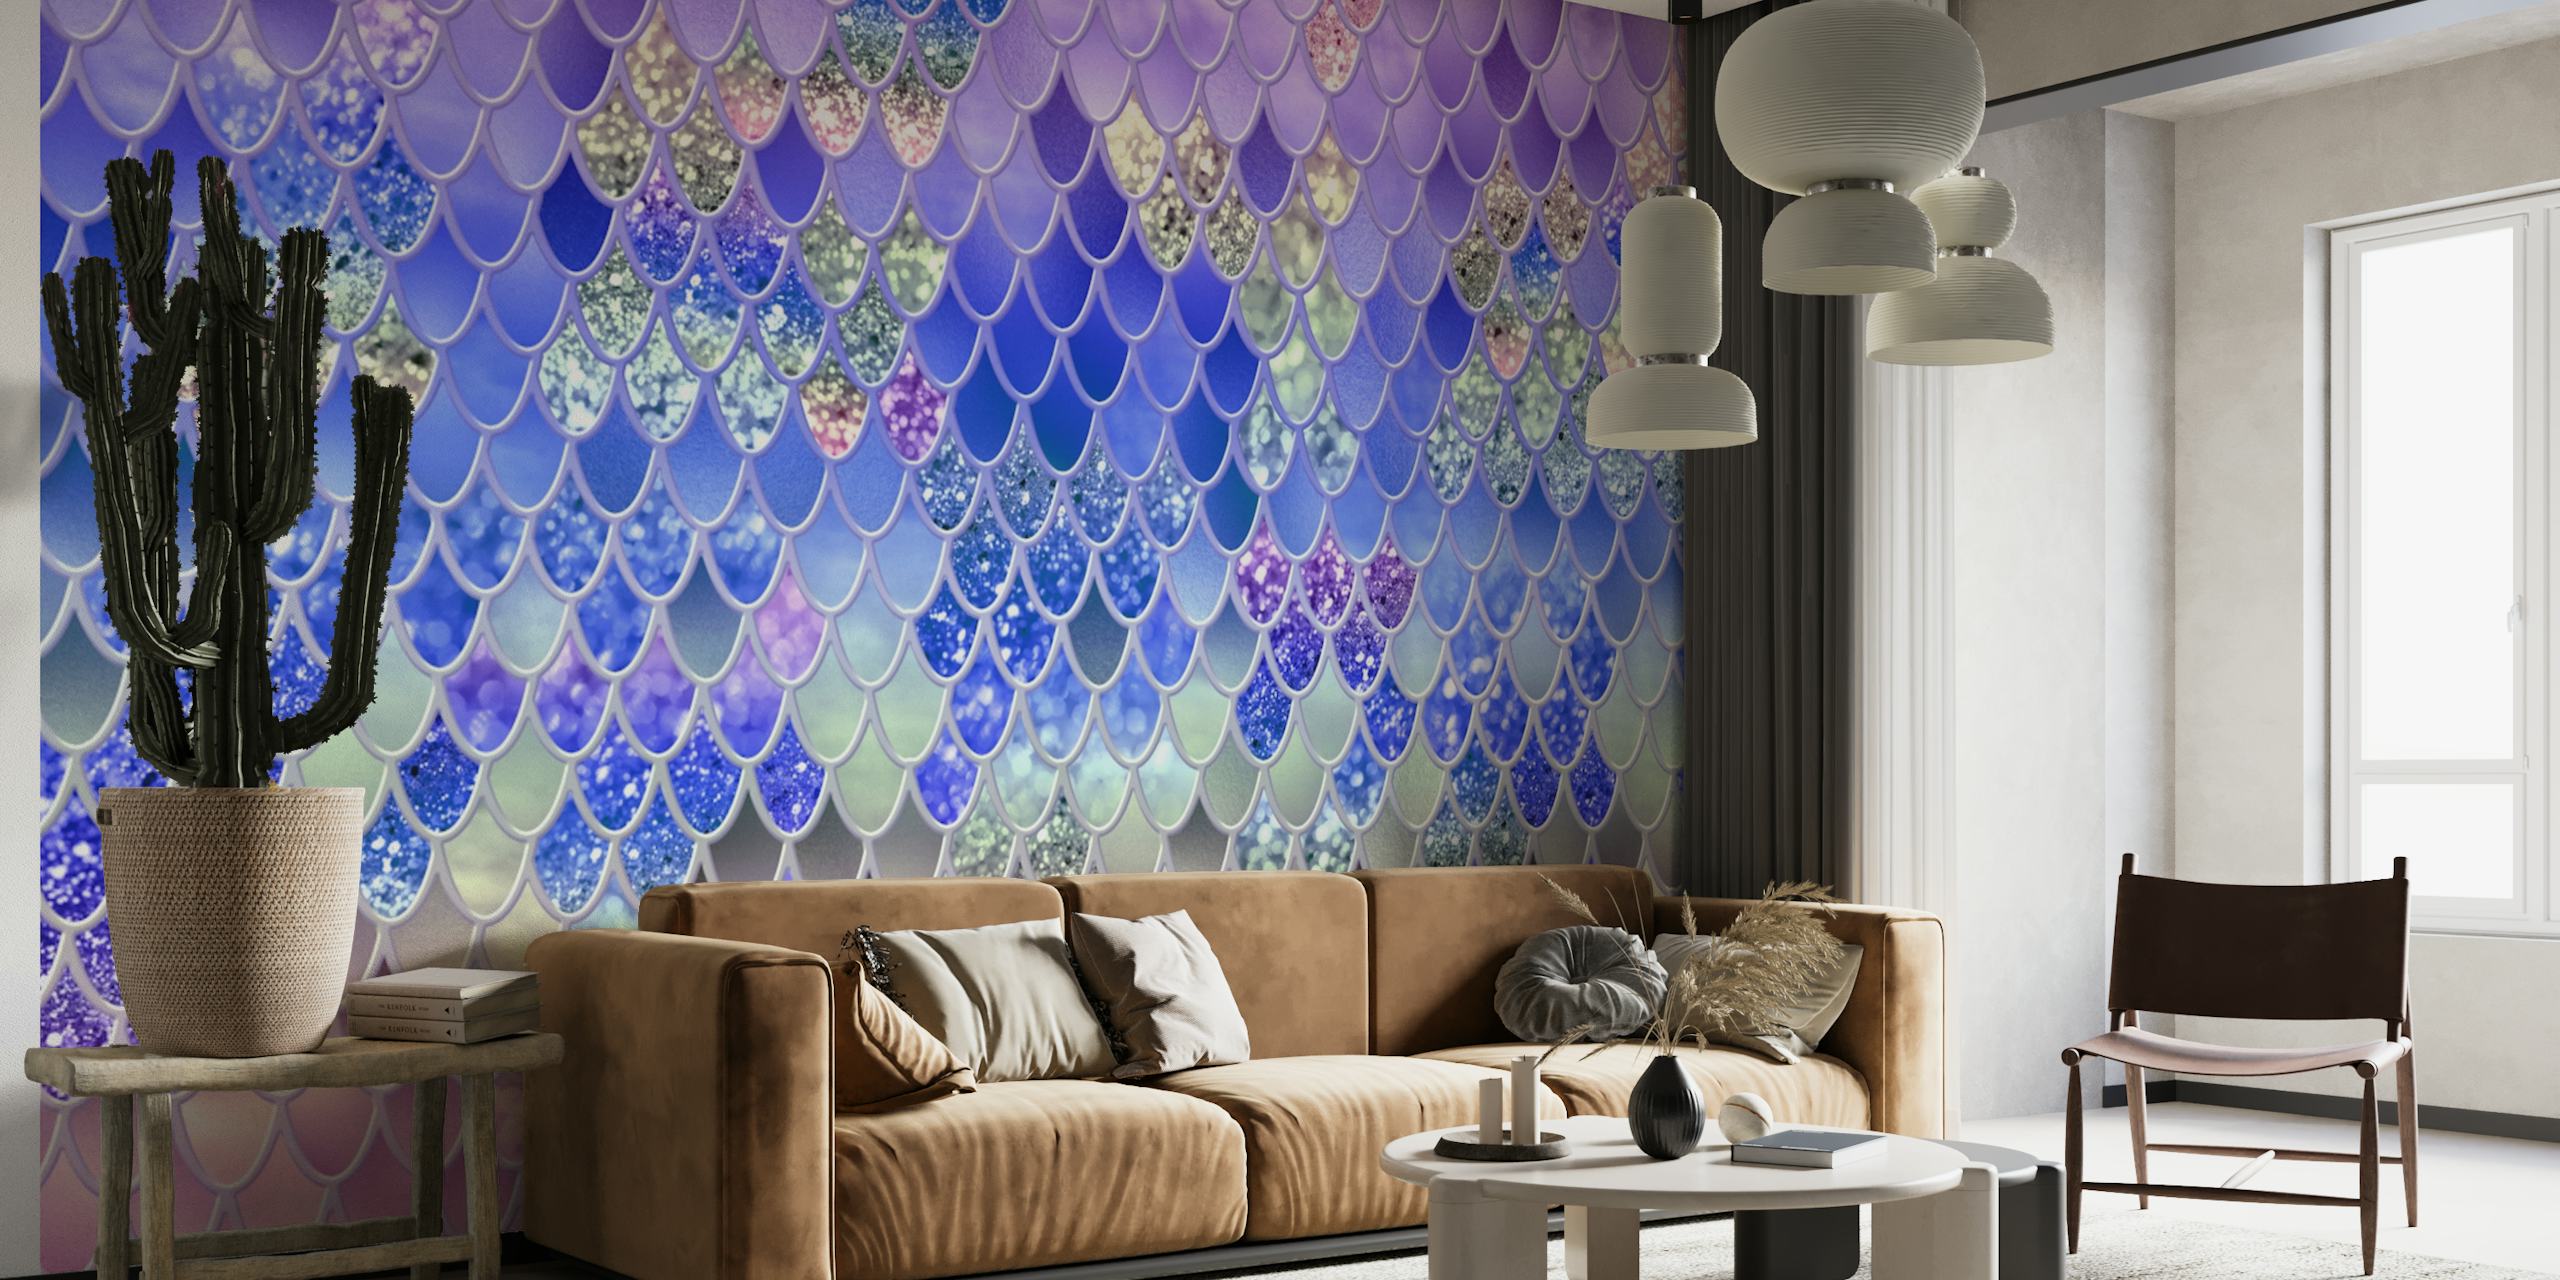 Shimmering mermaid scale pattern in purple and blue hues wall mural